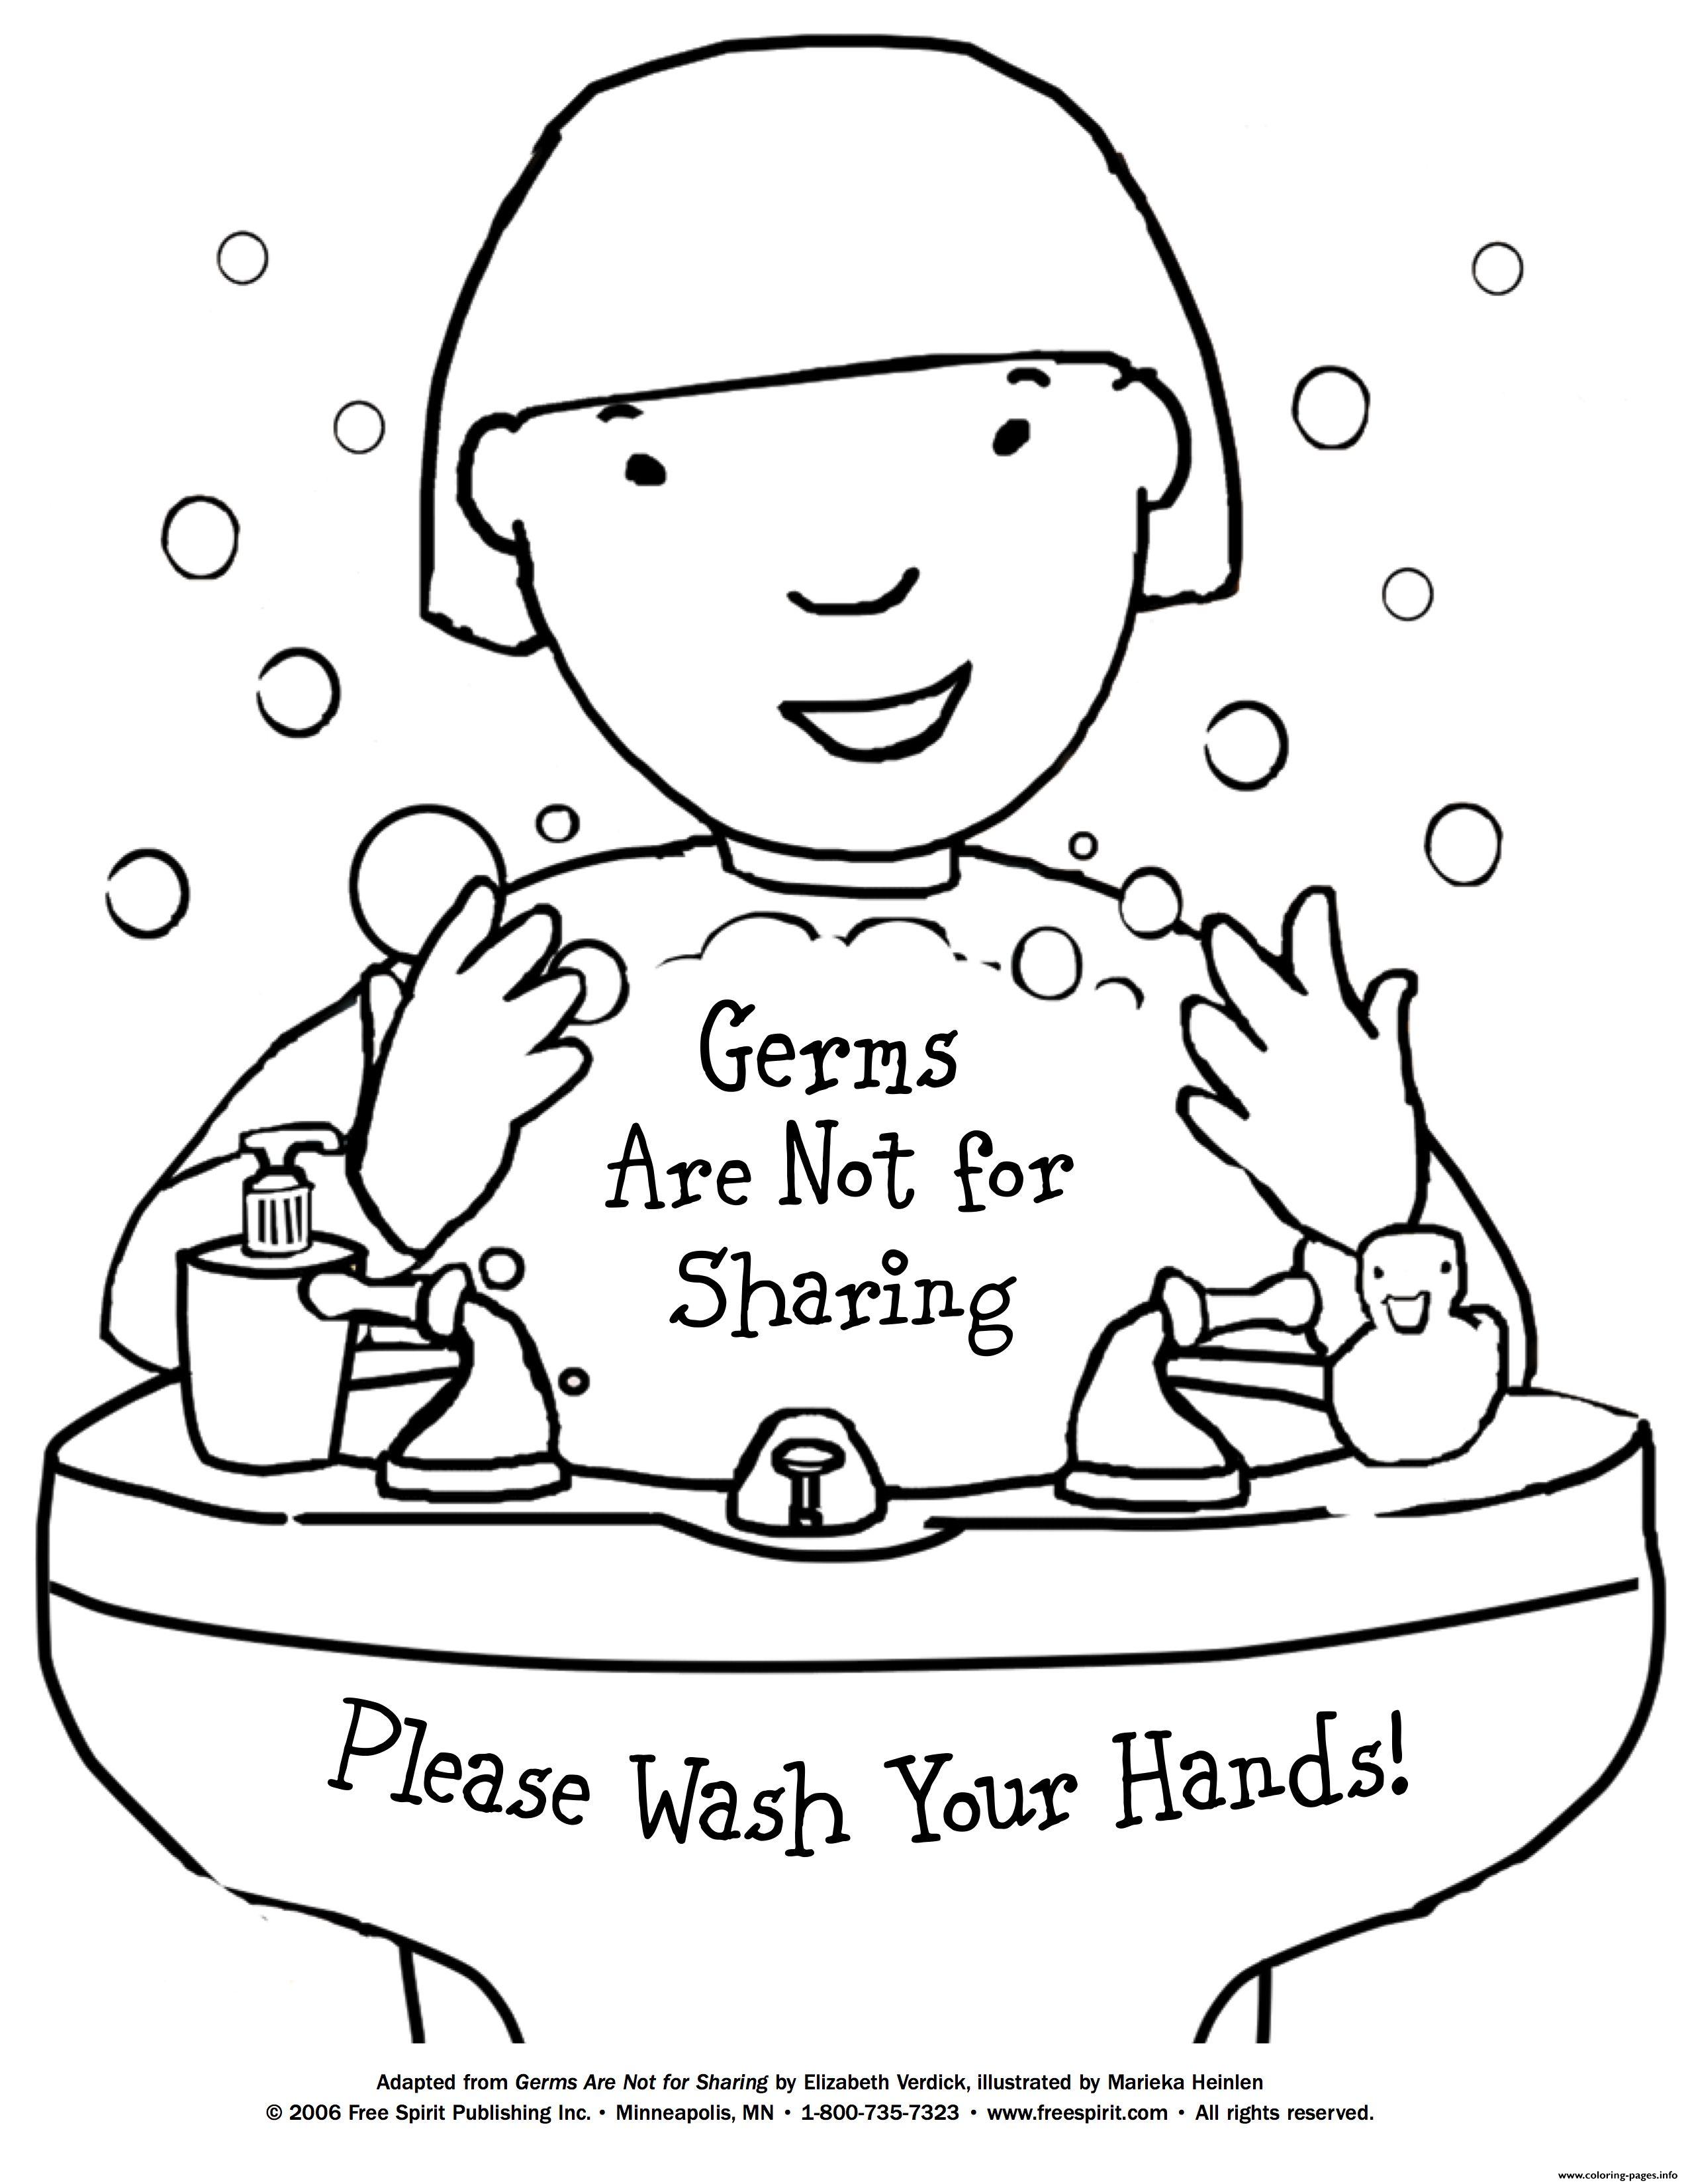 Germs Are Not For Sharing coloring pages